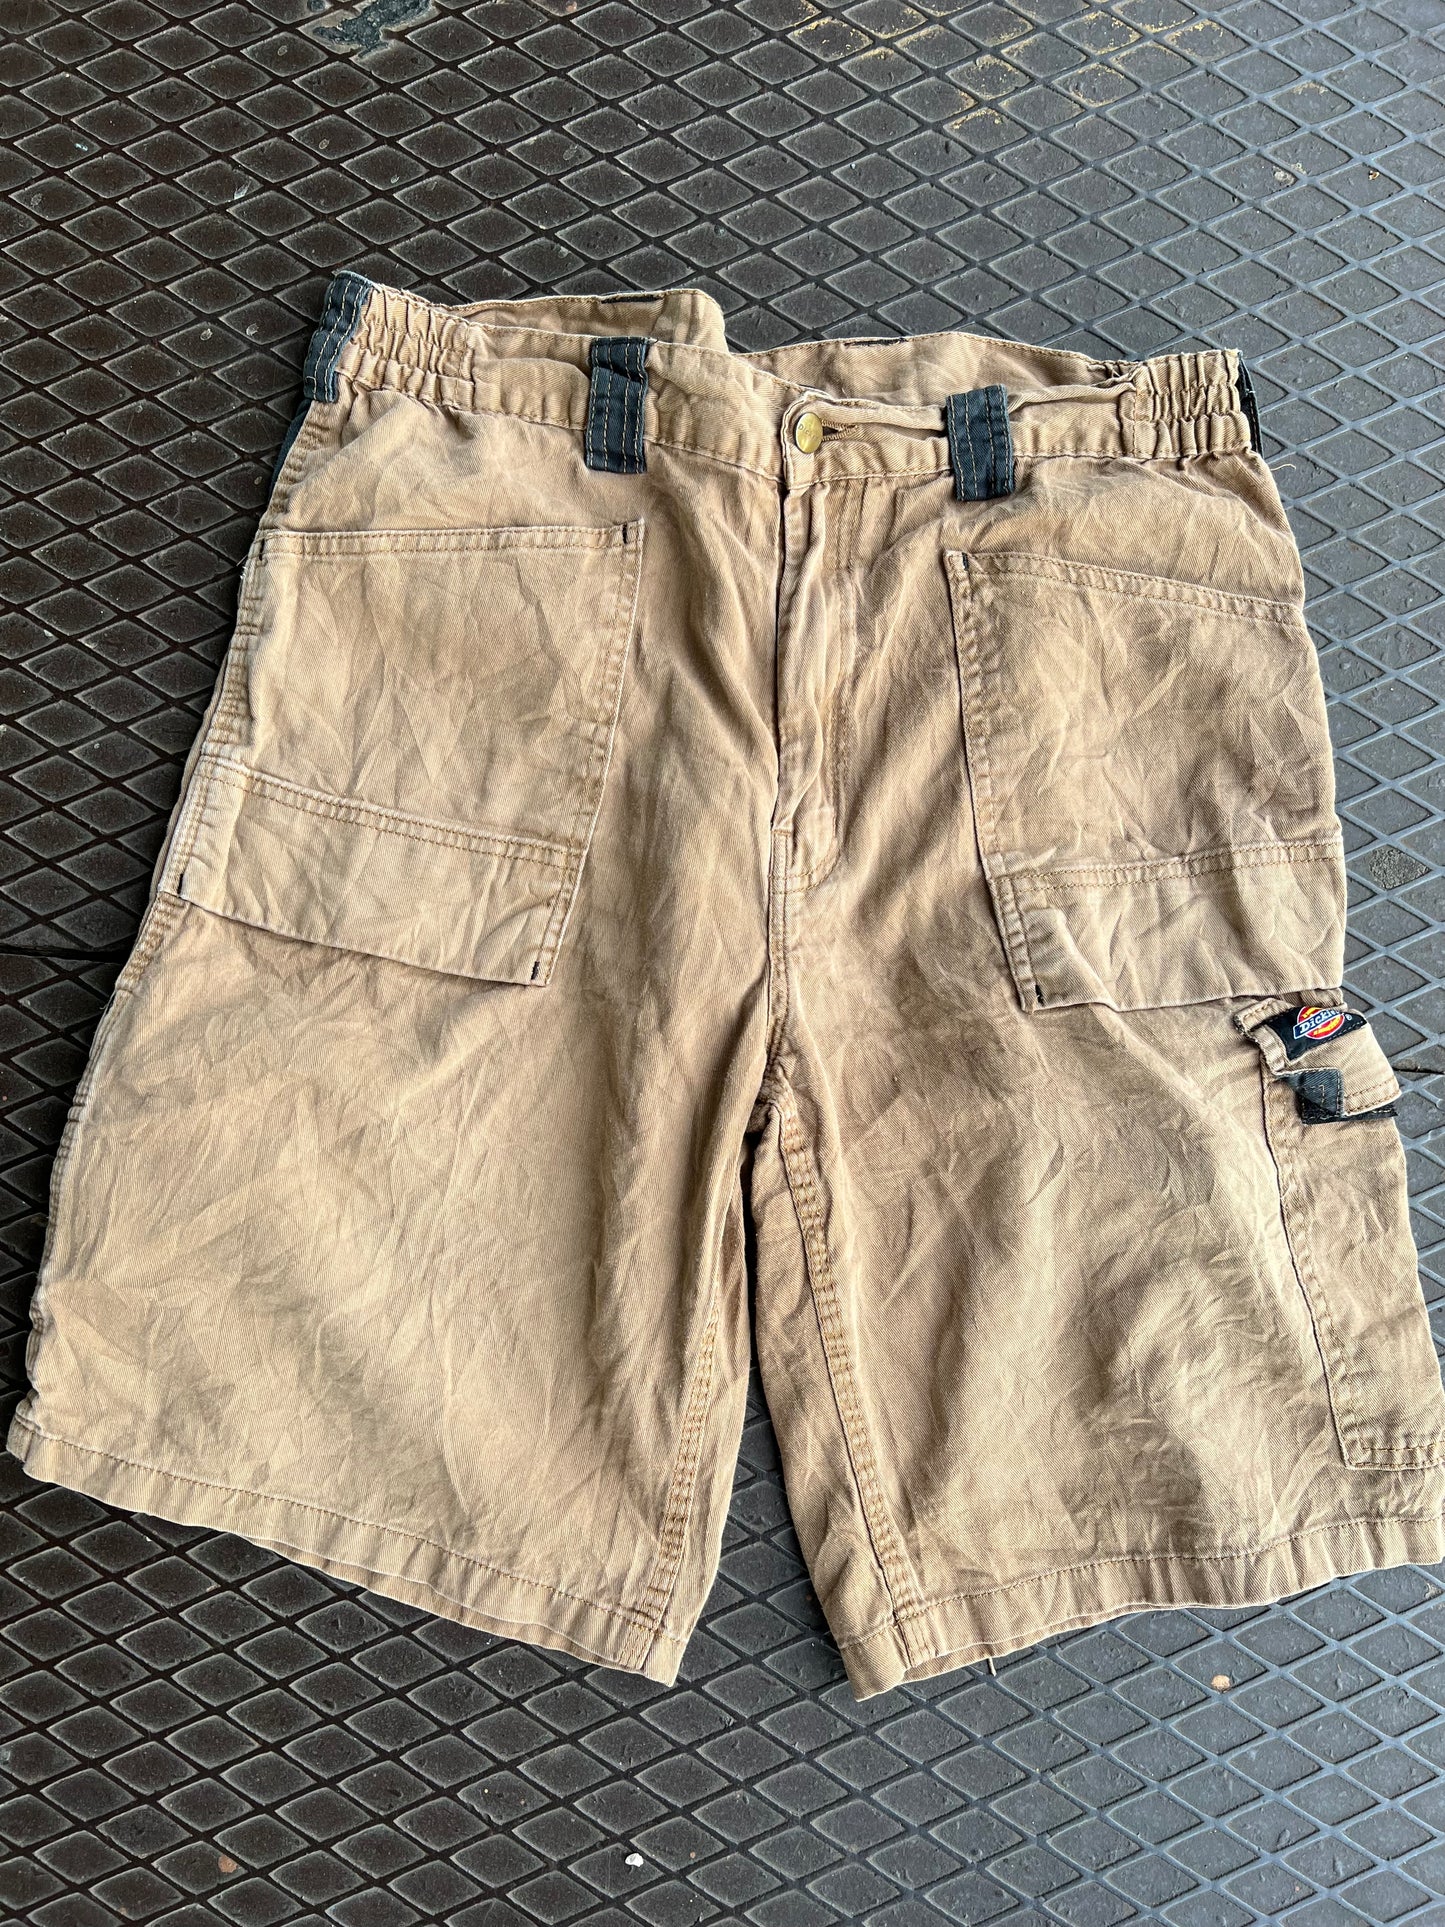 36 - Dickies Brown/Black Accents Cargo Shorts